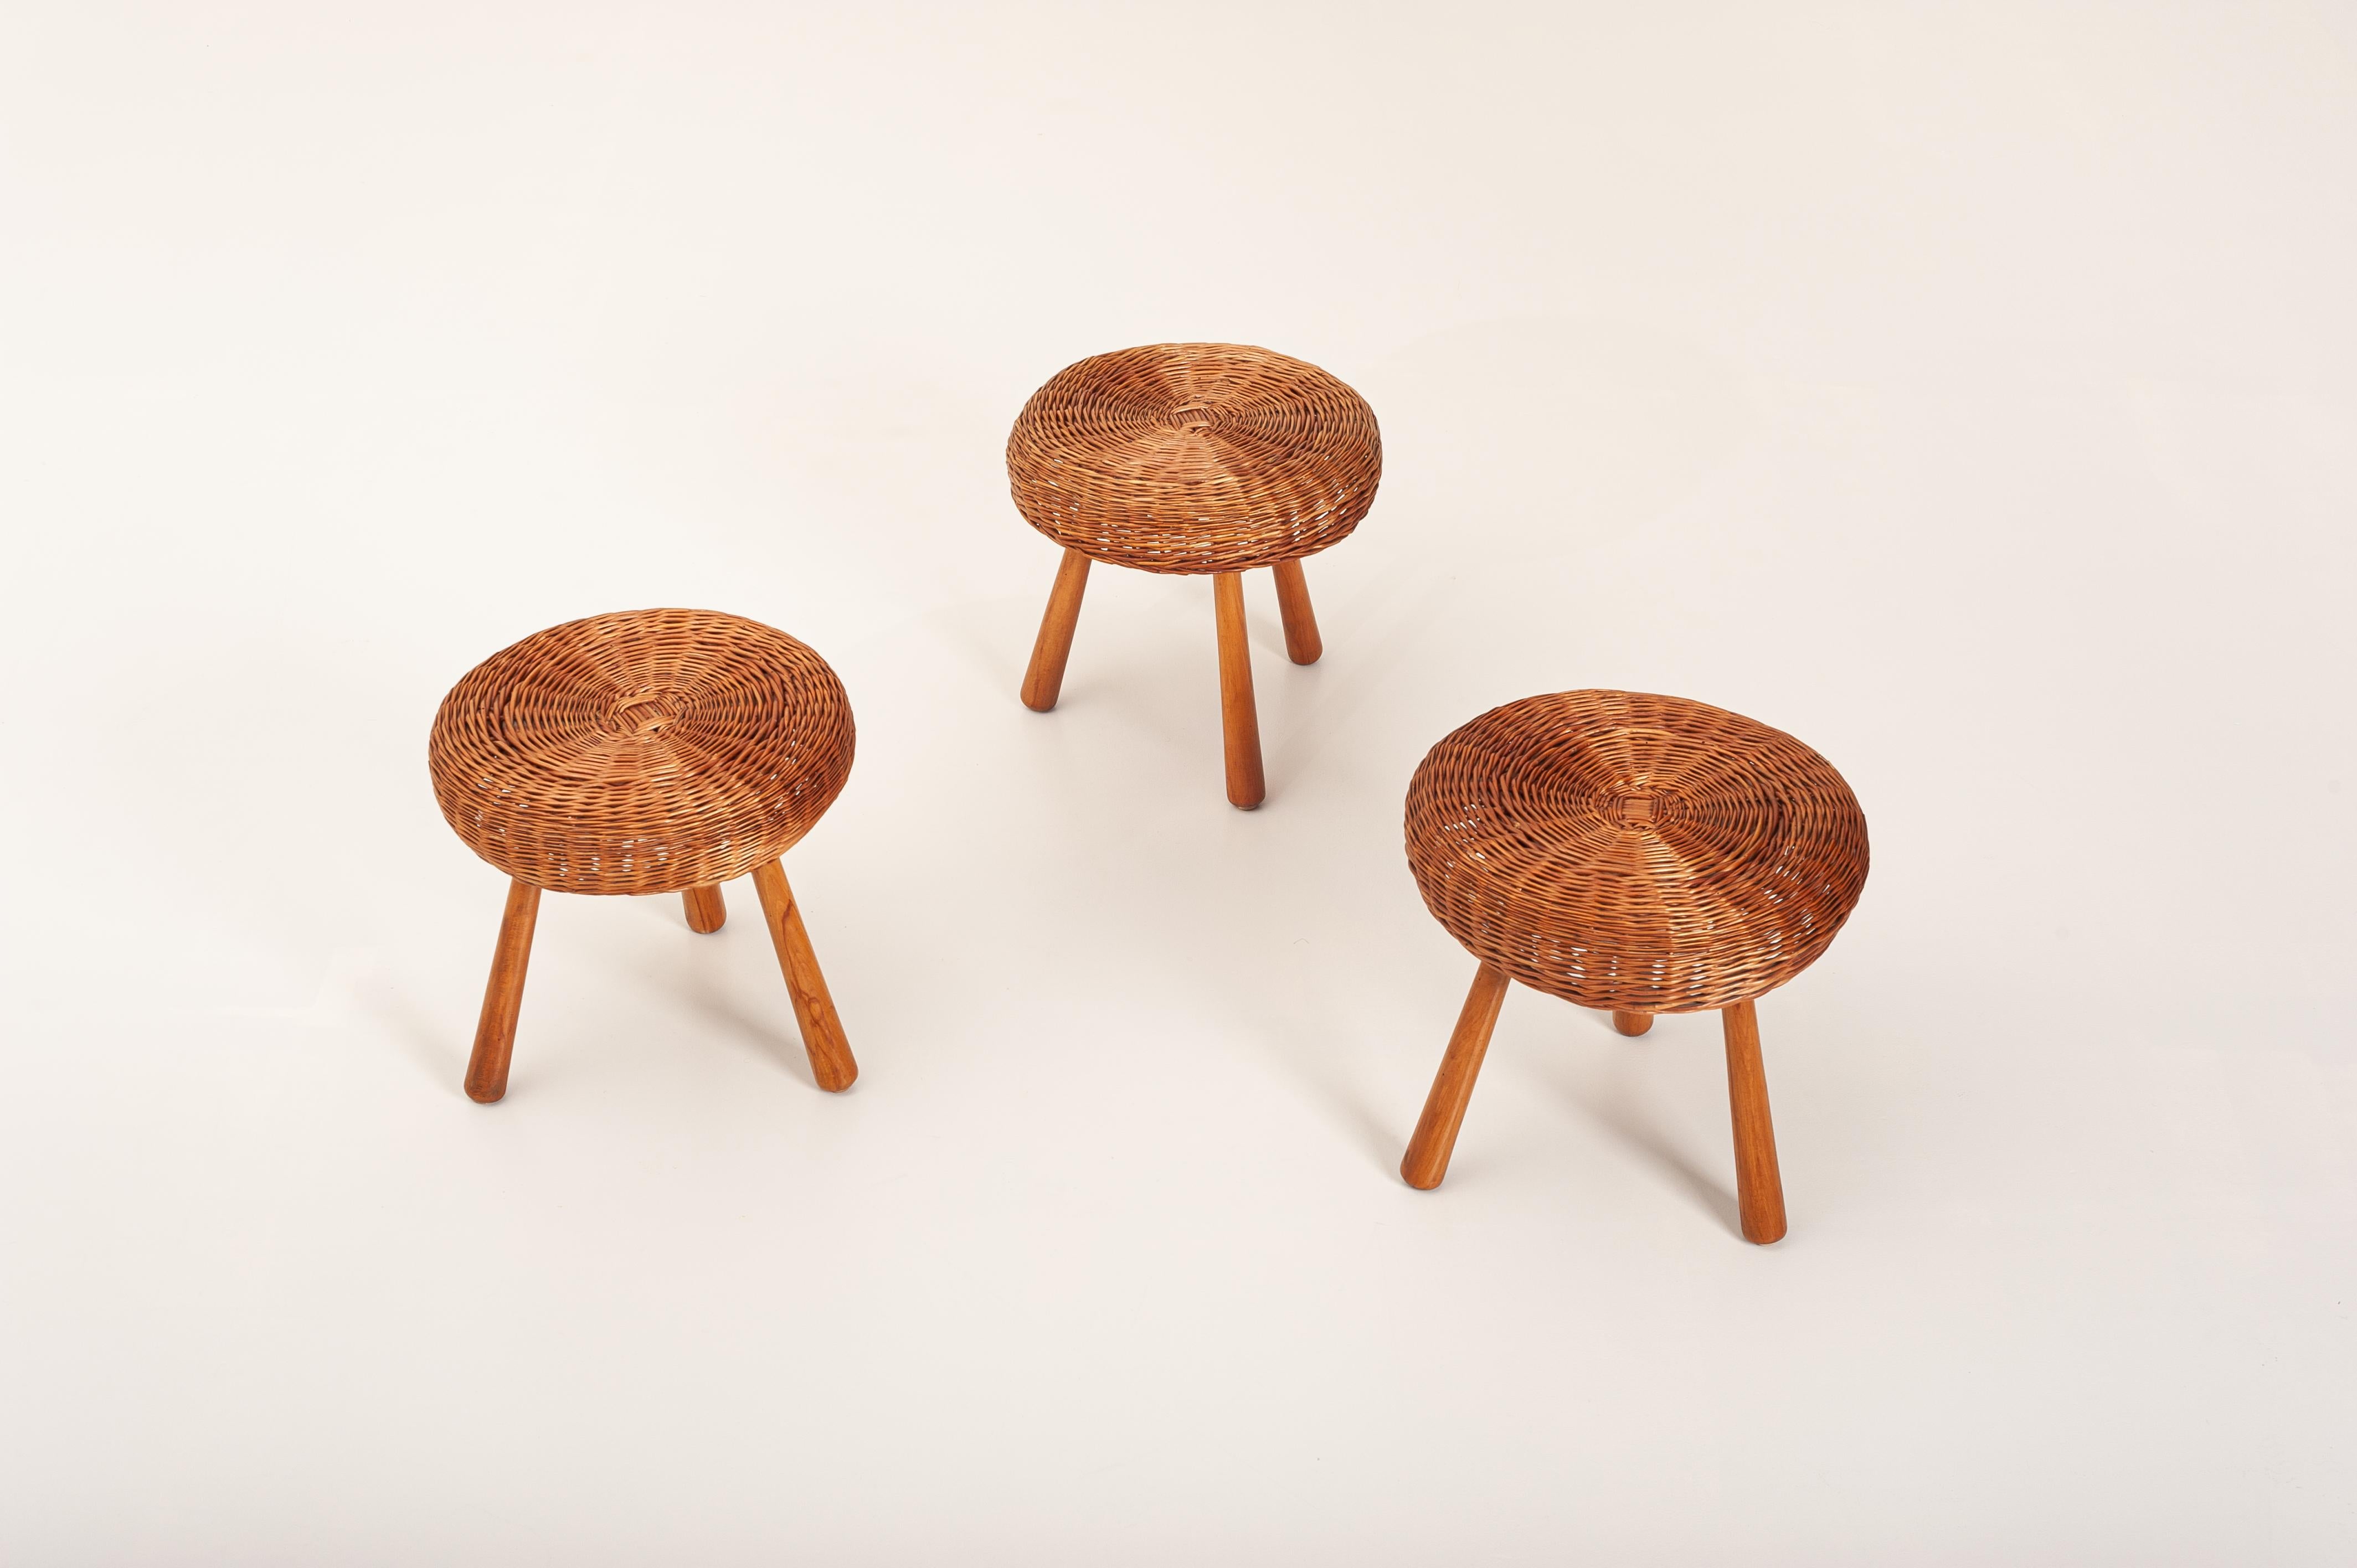 Tony Paul Attributed Stools, Woven Wicker, Solid Beech, United States, 1950s For Sale 1